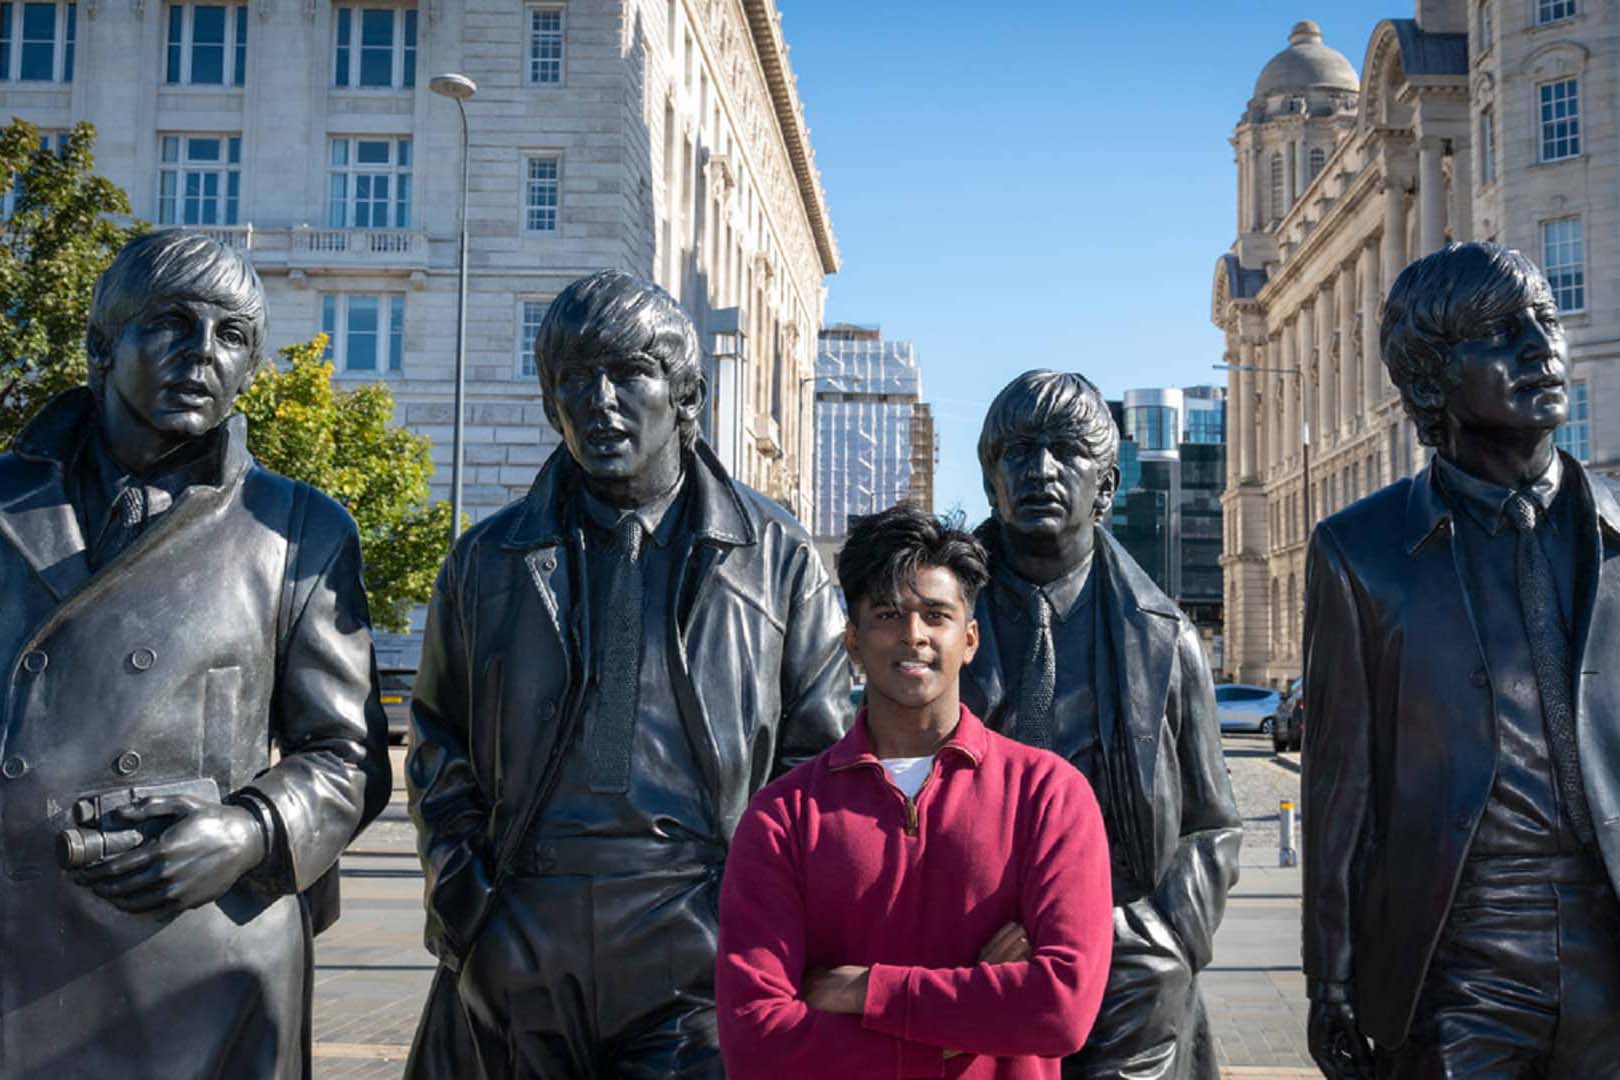 A student stands in front of a sculpture of The Beatles on Liverpool's waterfront